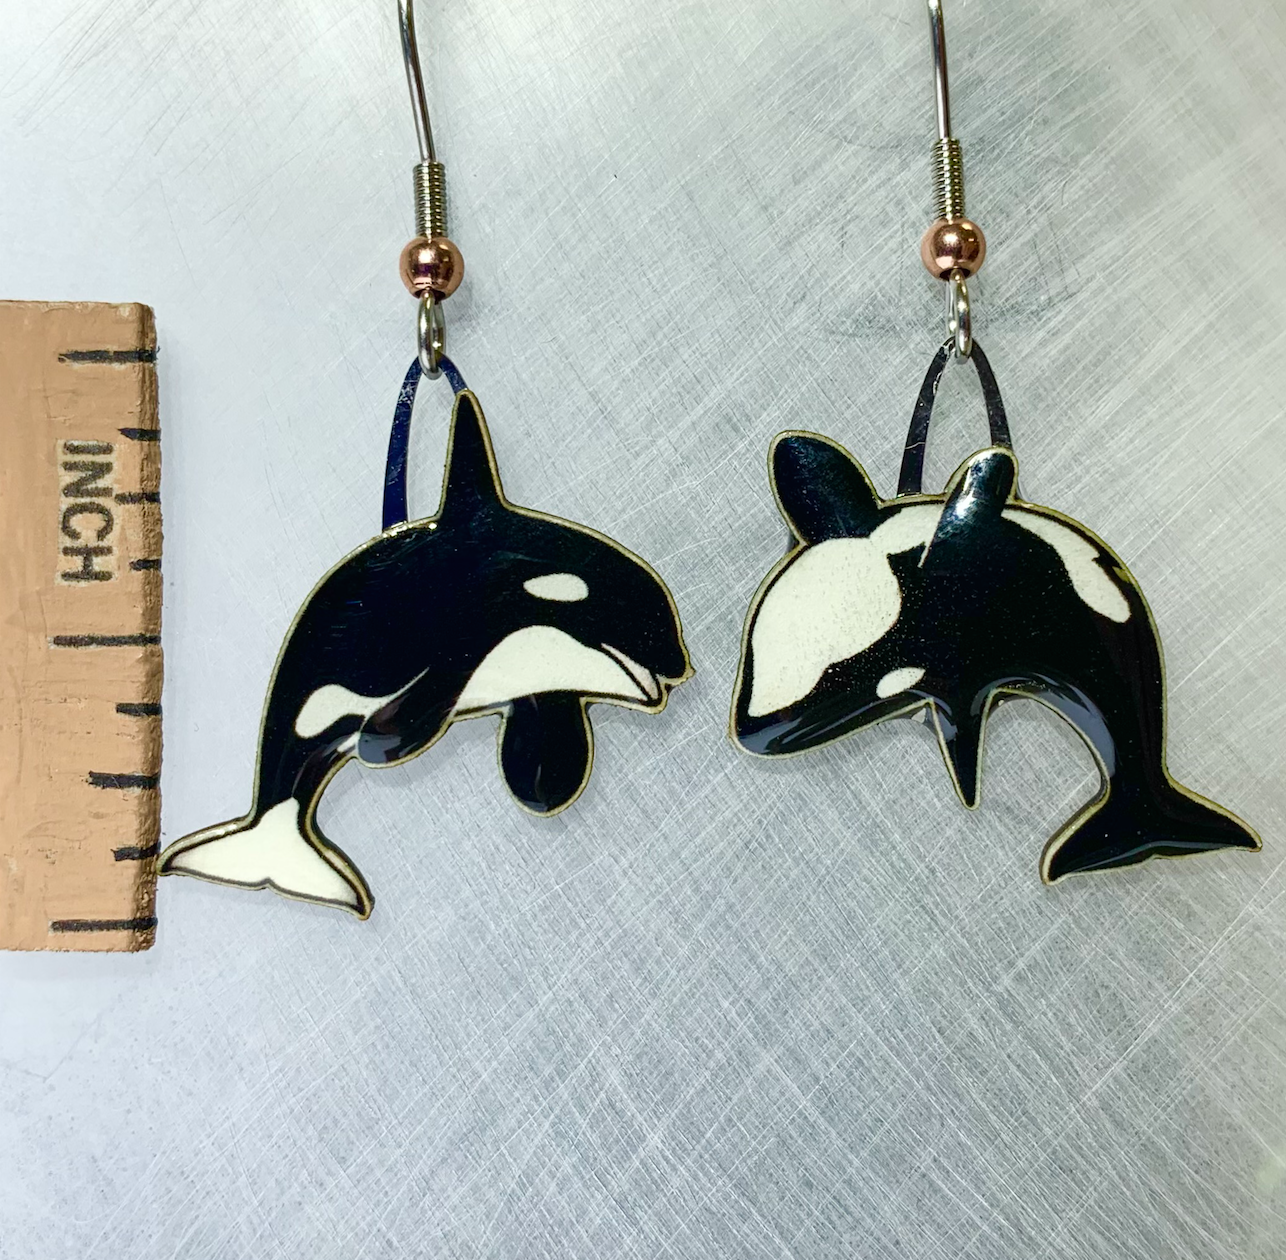 Picture shown is of 1 inch tall pair of earrings of the marine animal the Orca.